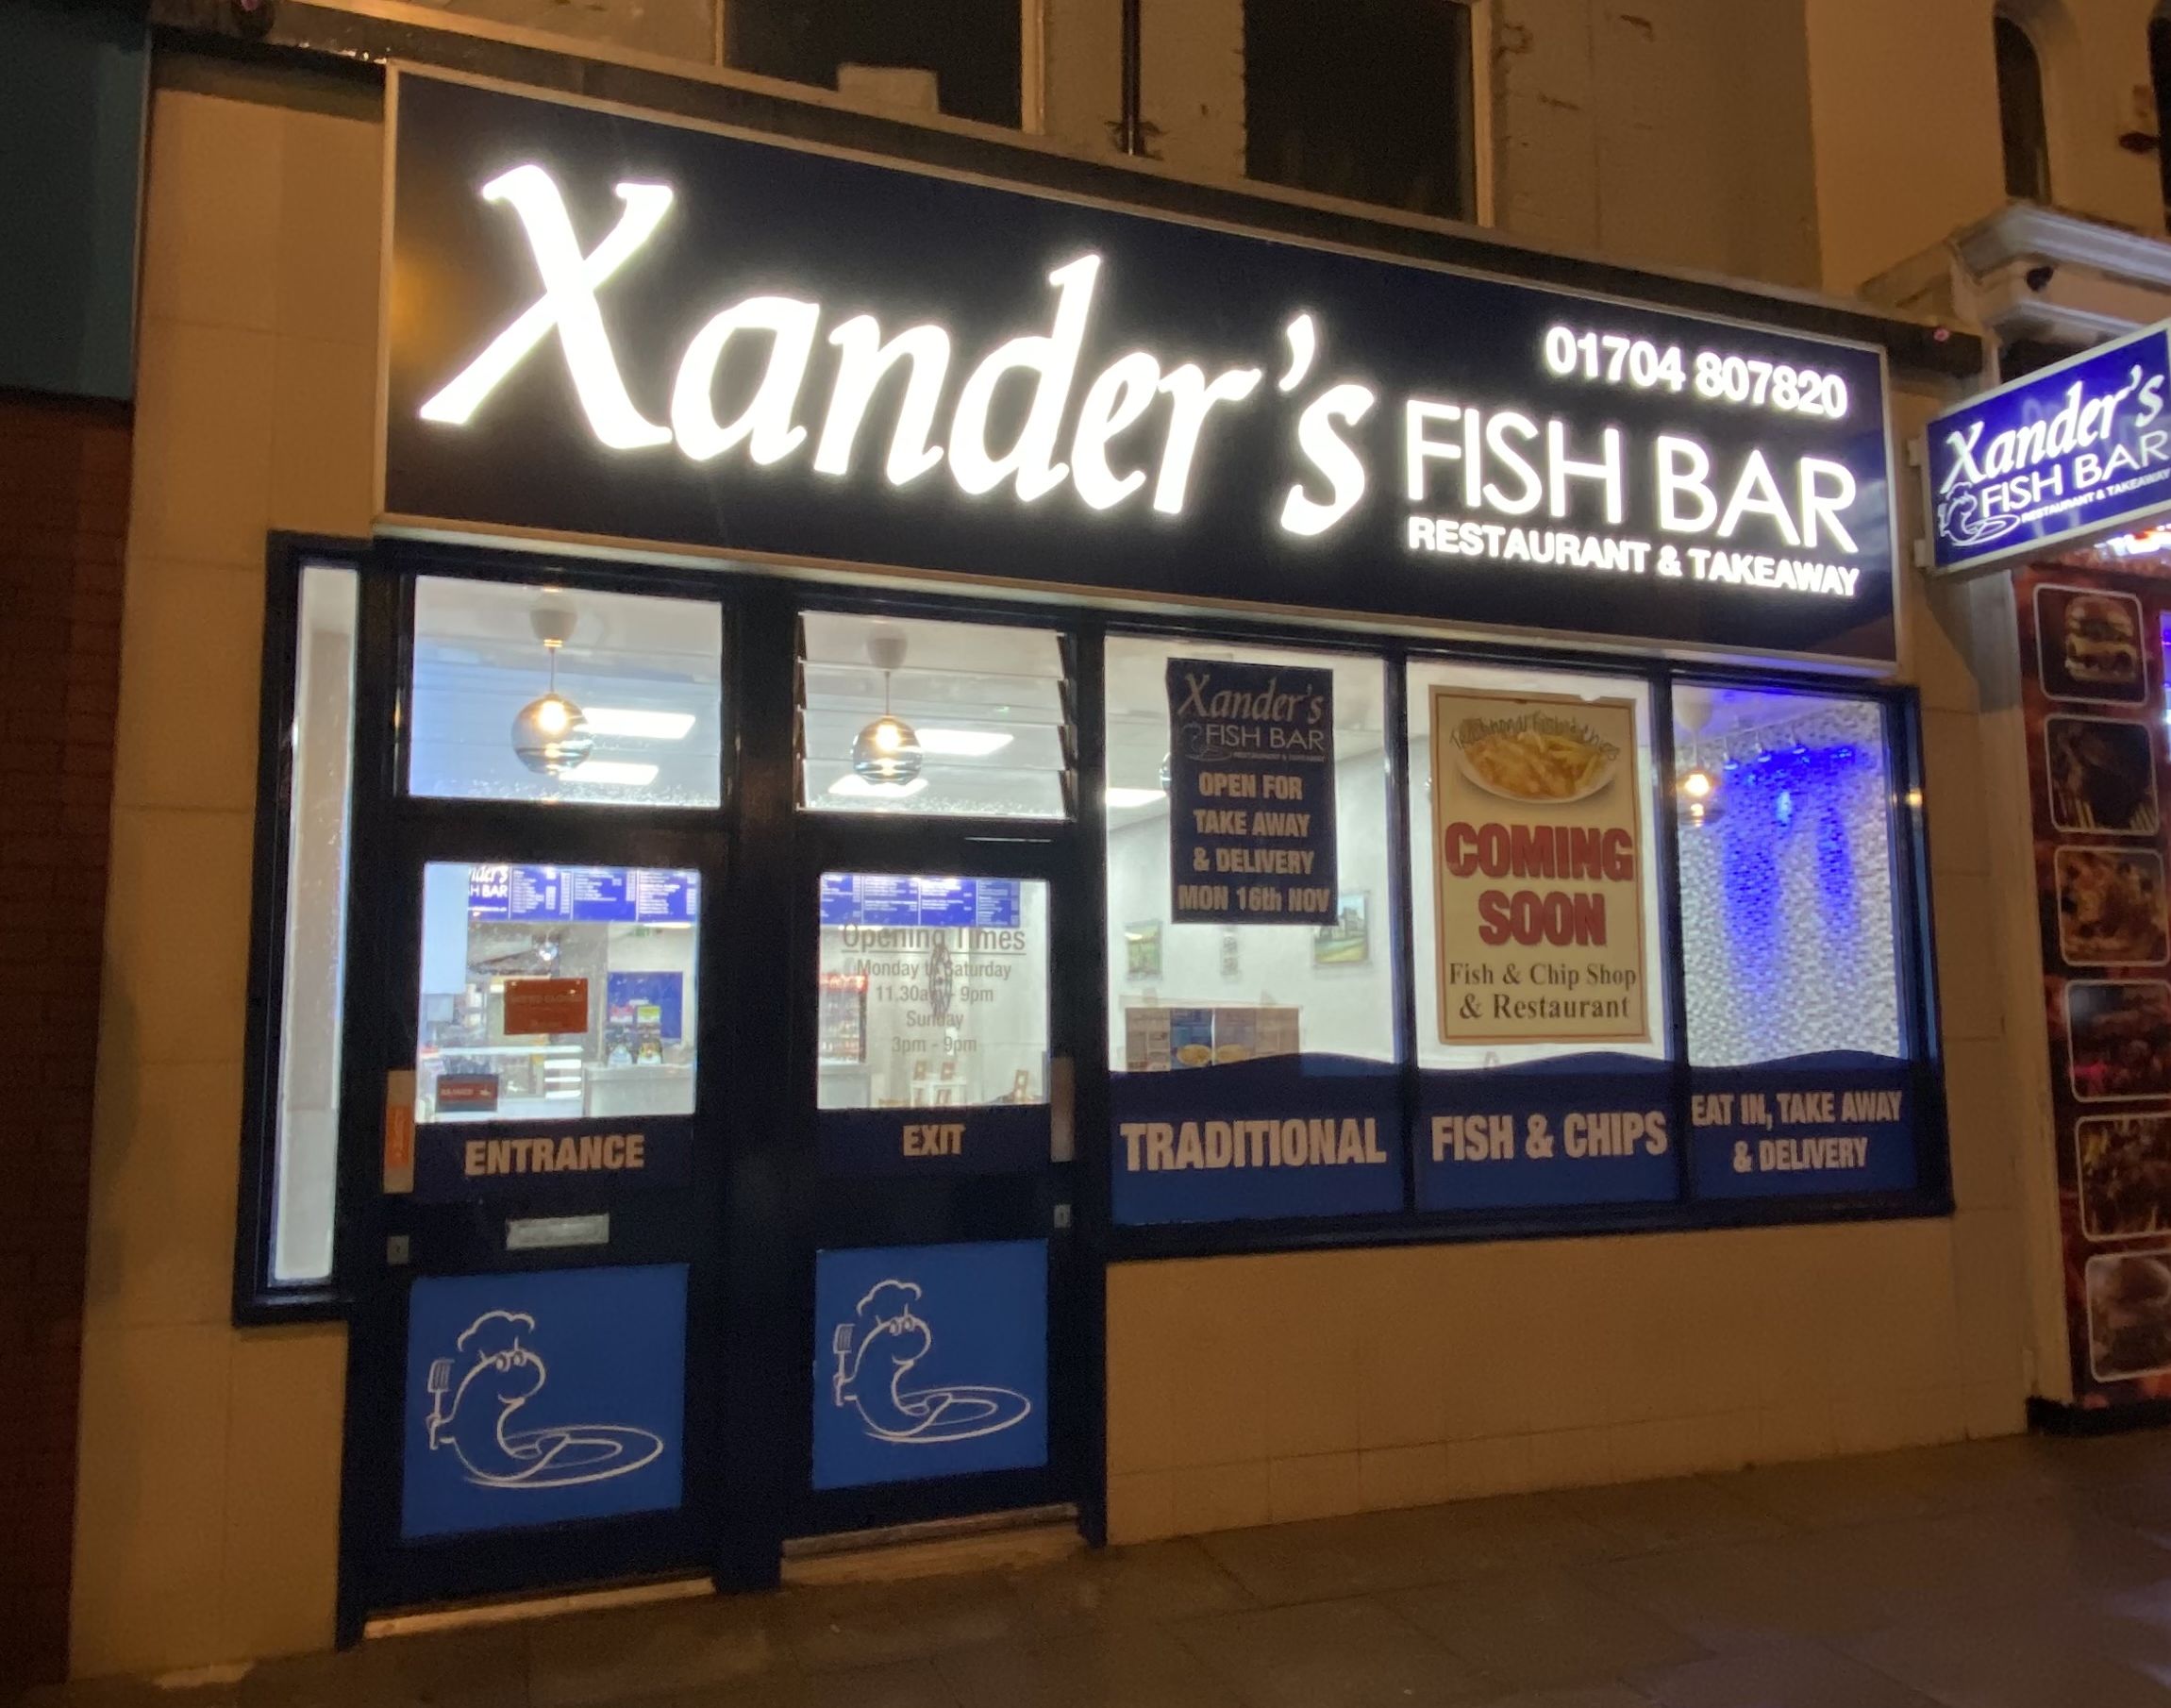 Xander's Fish Bar on Eastbank Street in Southport